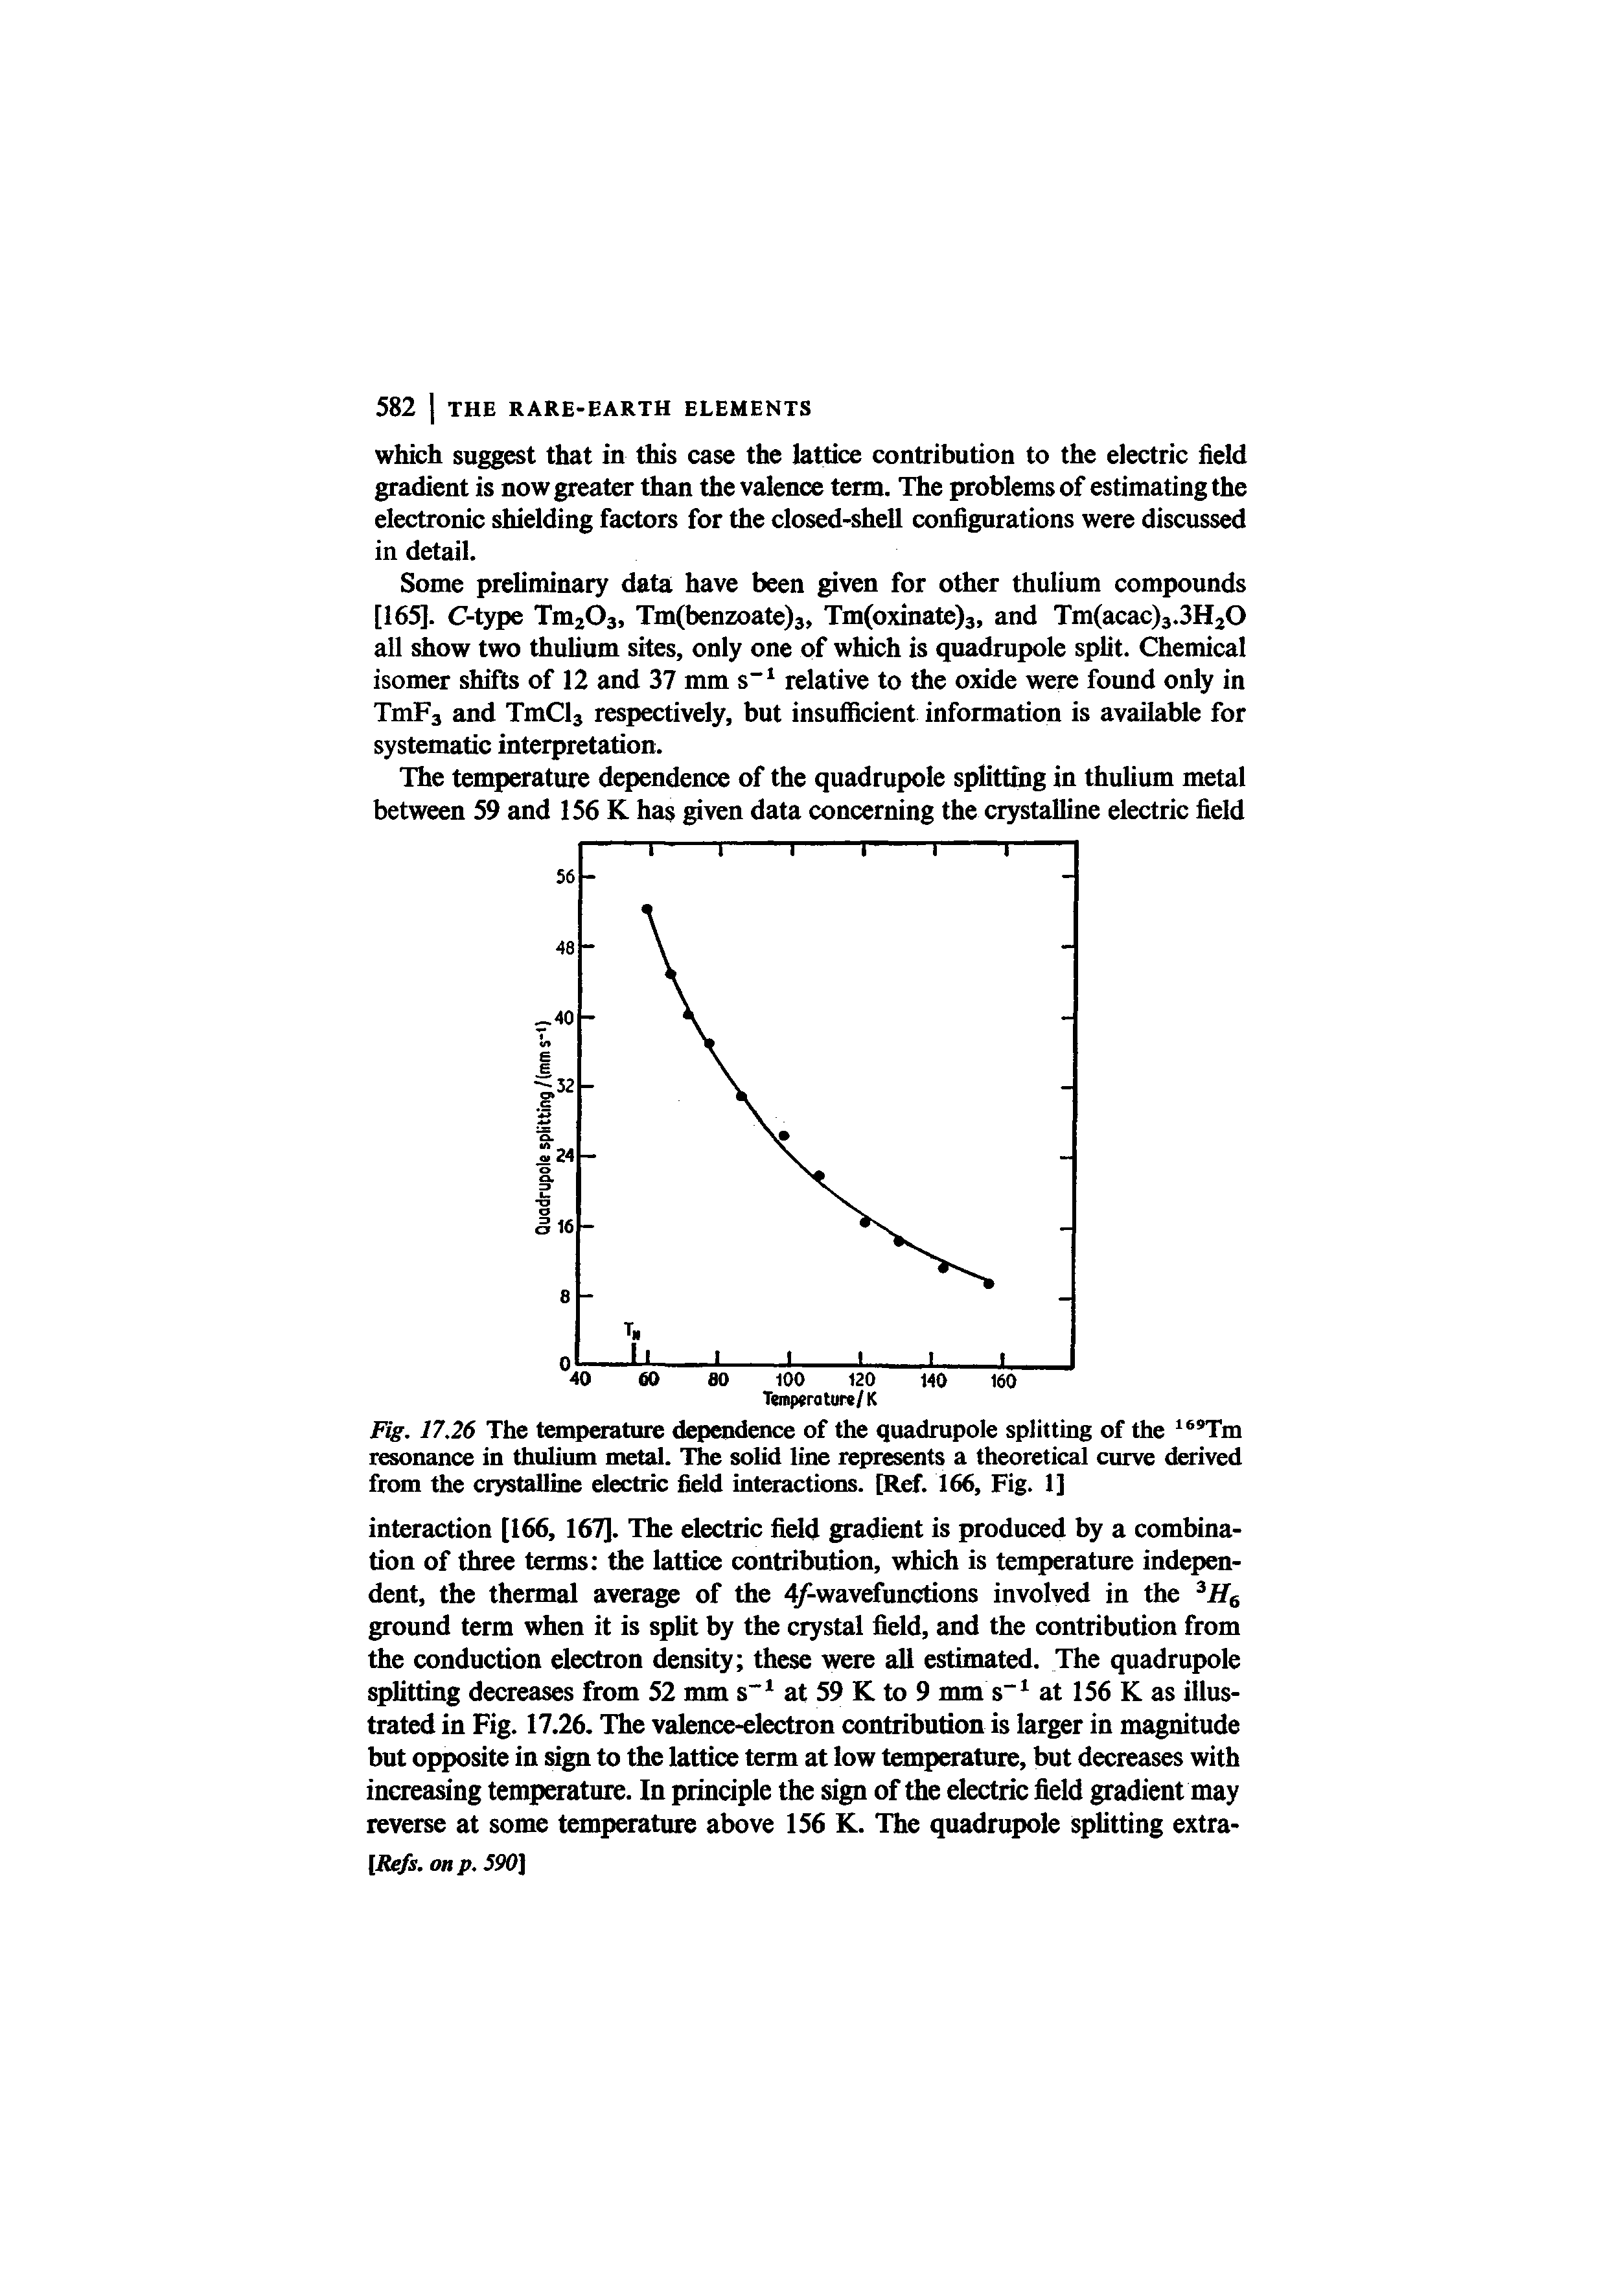 Fig. 17.26 The temperature dependence of the quadrupole splitting of the Tm resonance in thulium metal. The solid line represents a theoretical curve derived from the crystalline electric field interactions. [Ref. 166, Fig. 1]...